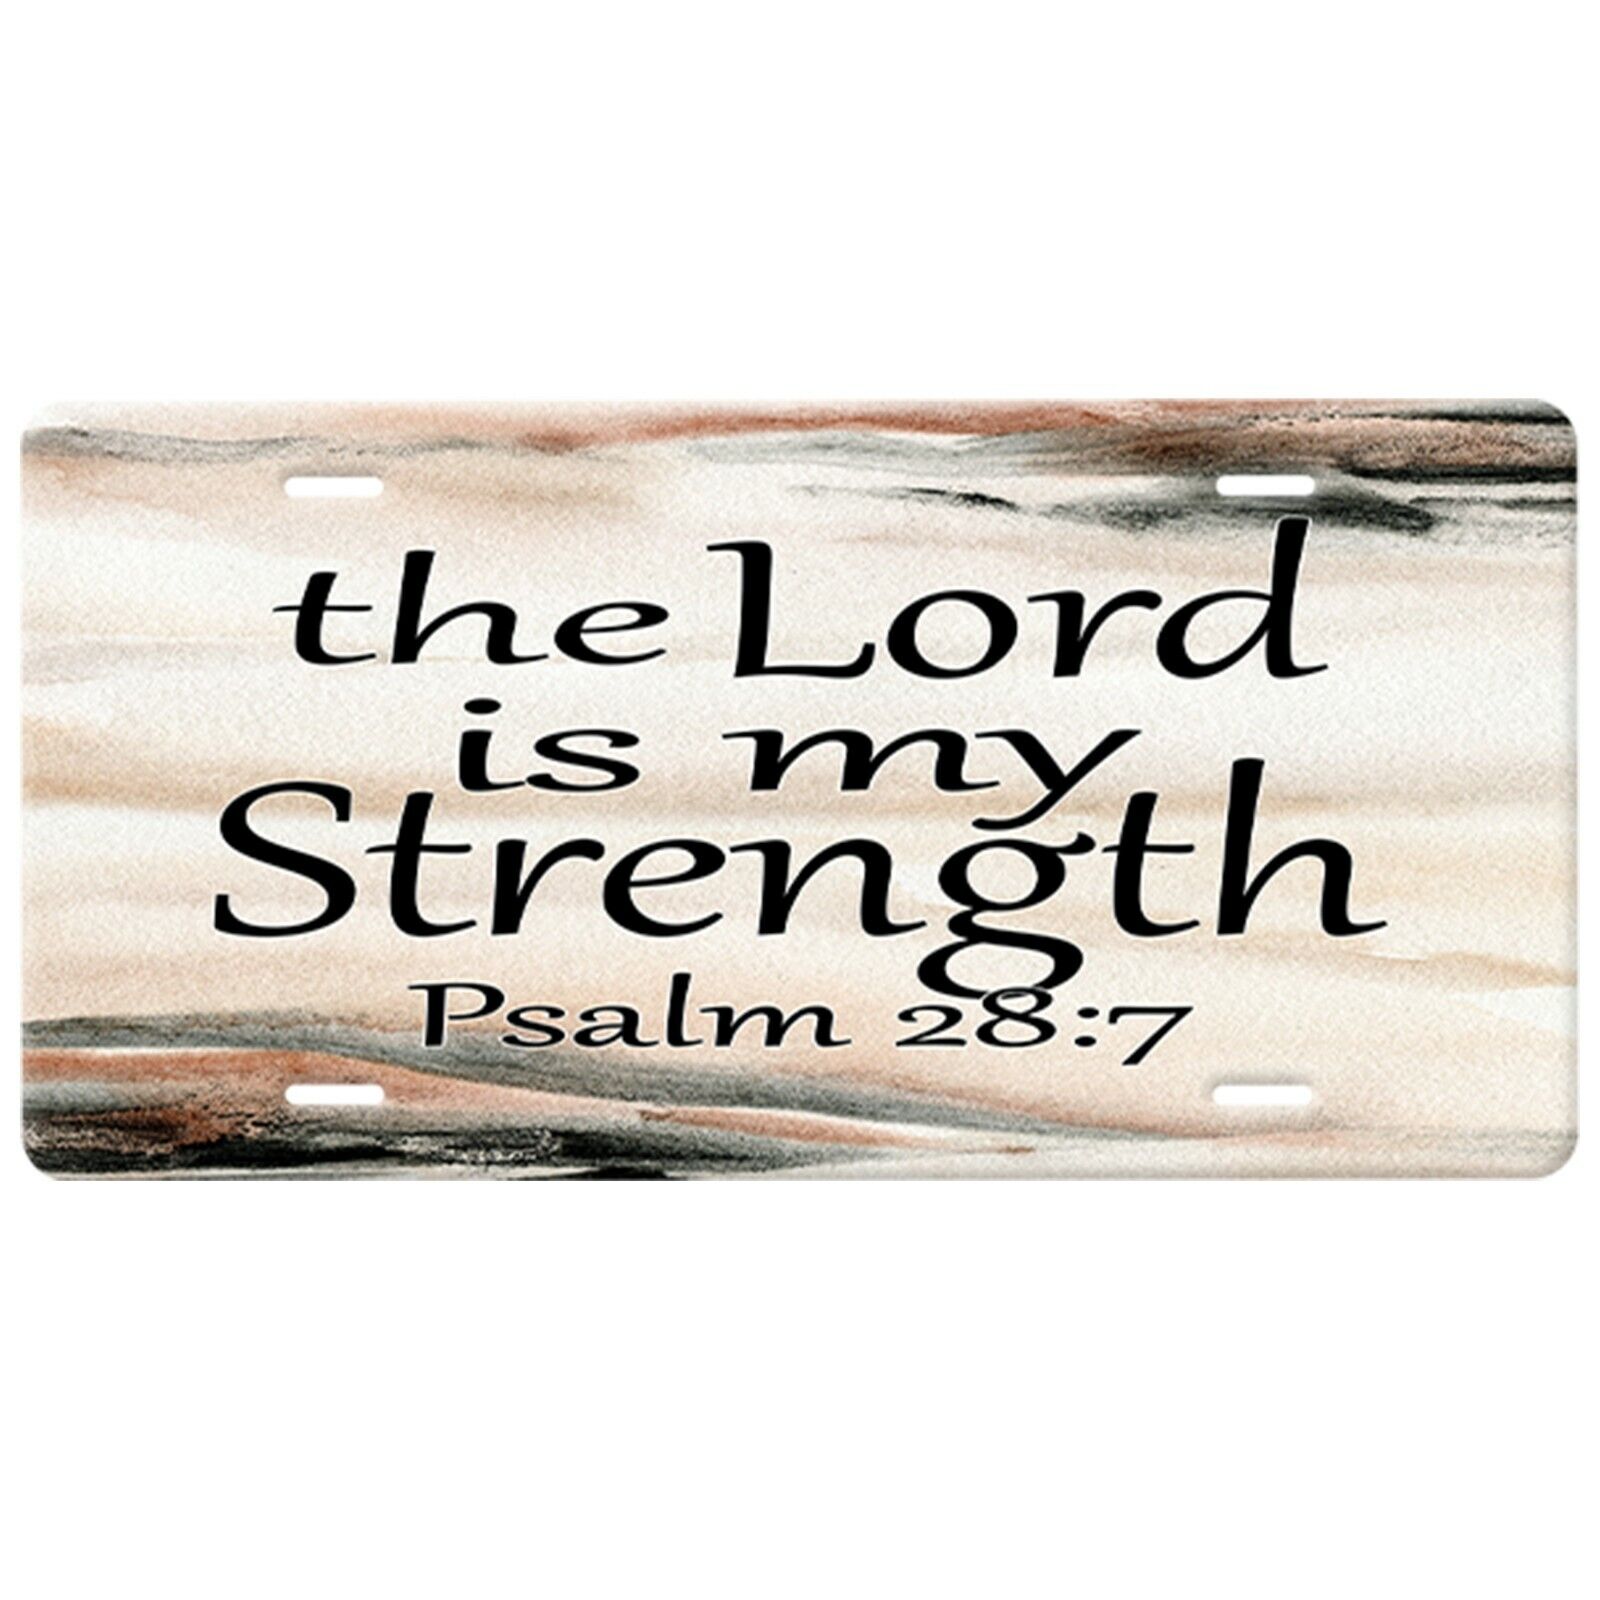 Psalm 28:7-The Lord Is My Strength-Christian License Plate-Black Quote-Cream,Tan